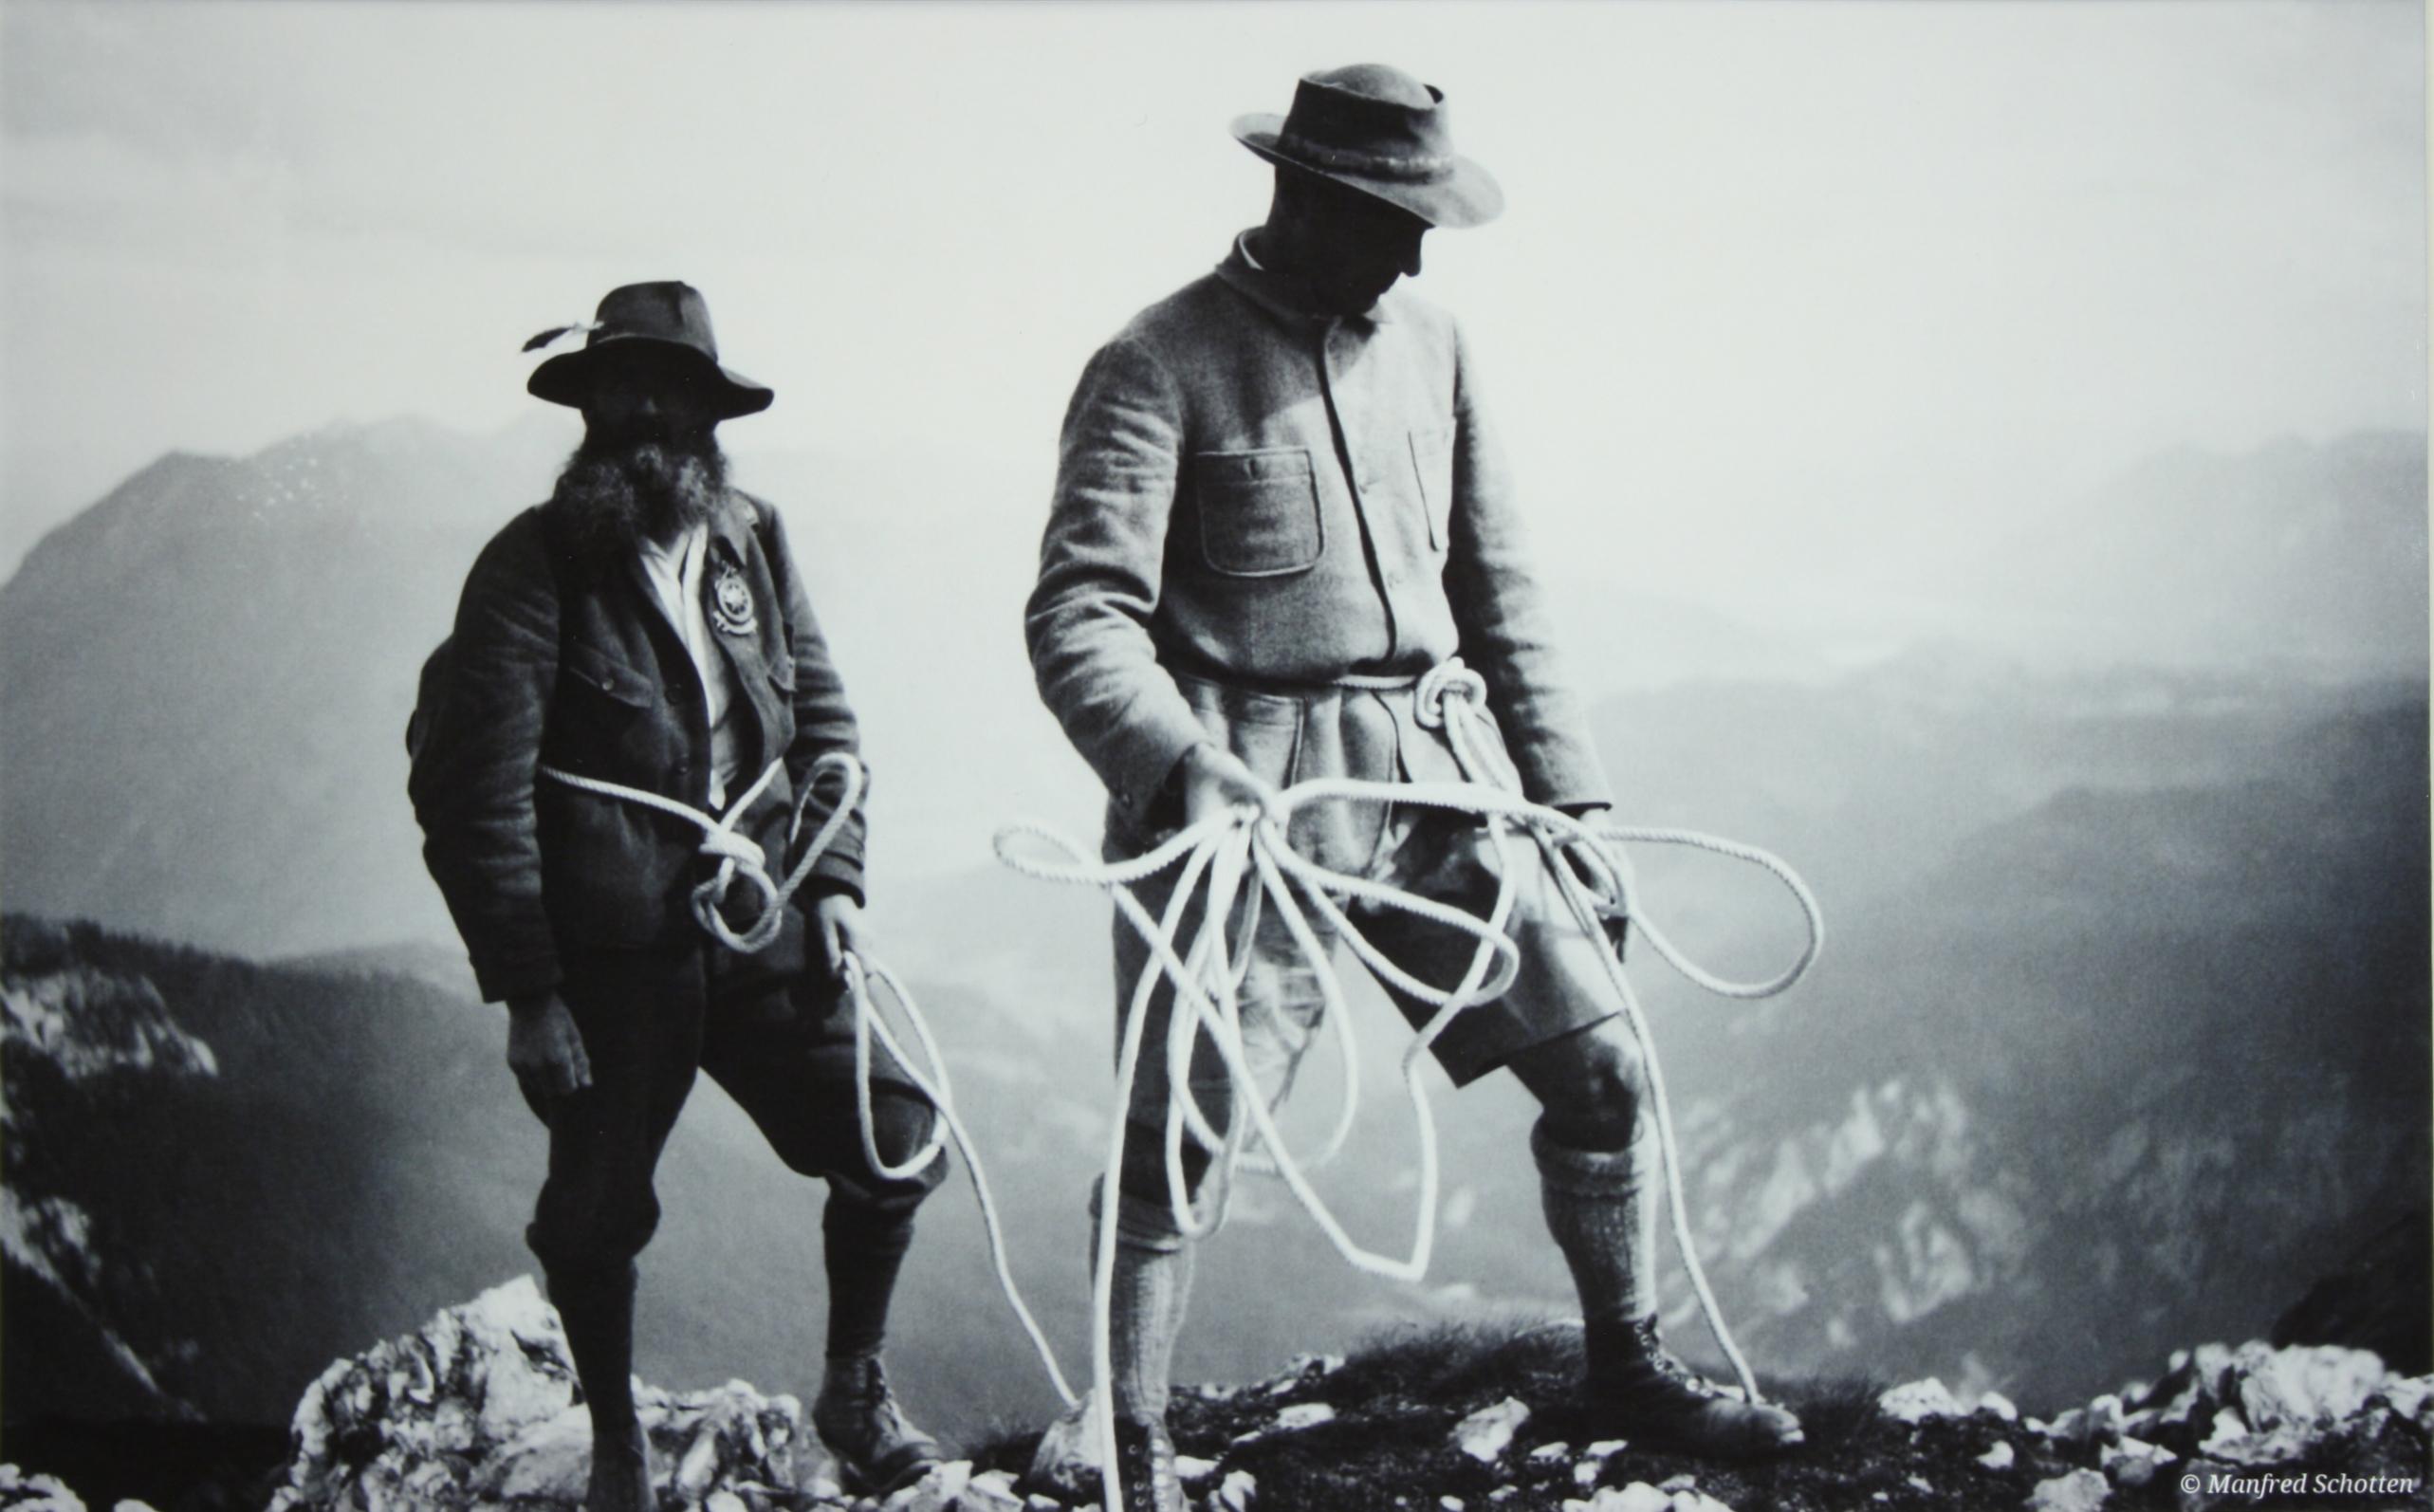 Sporting Art Alpine Ski Photograph, 'SAFETY FIRST' Taken from Original 1930s Photograph For Sale